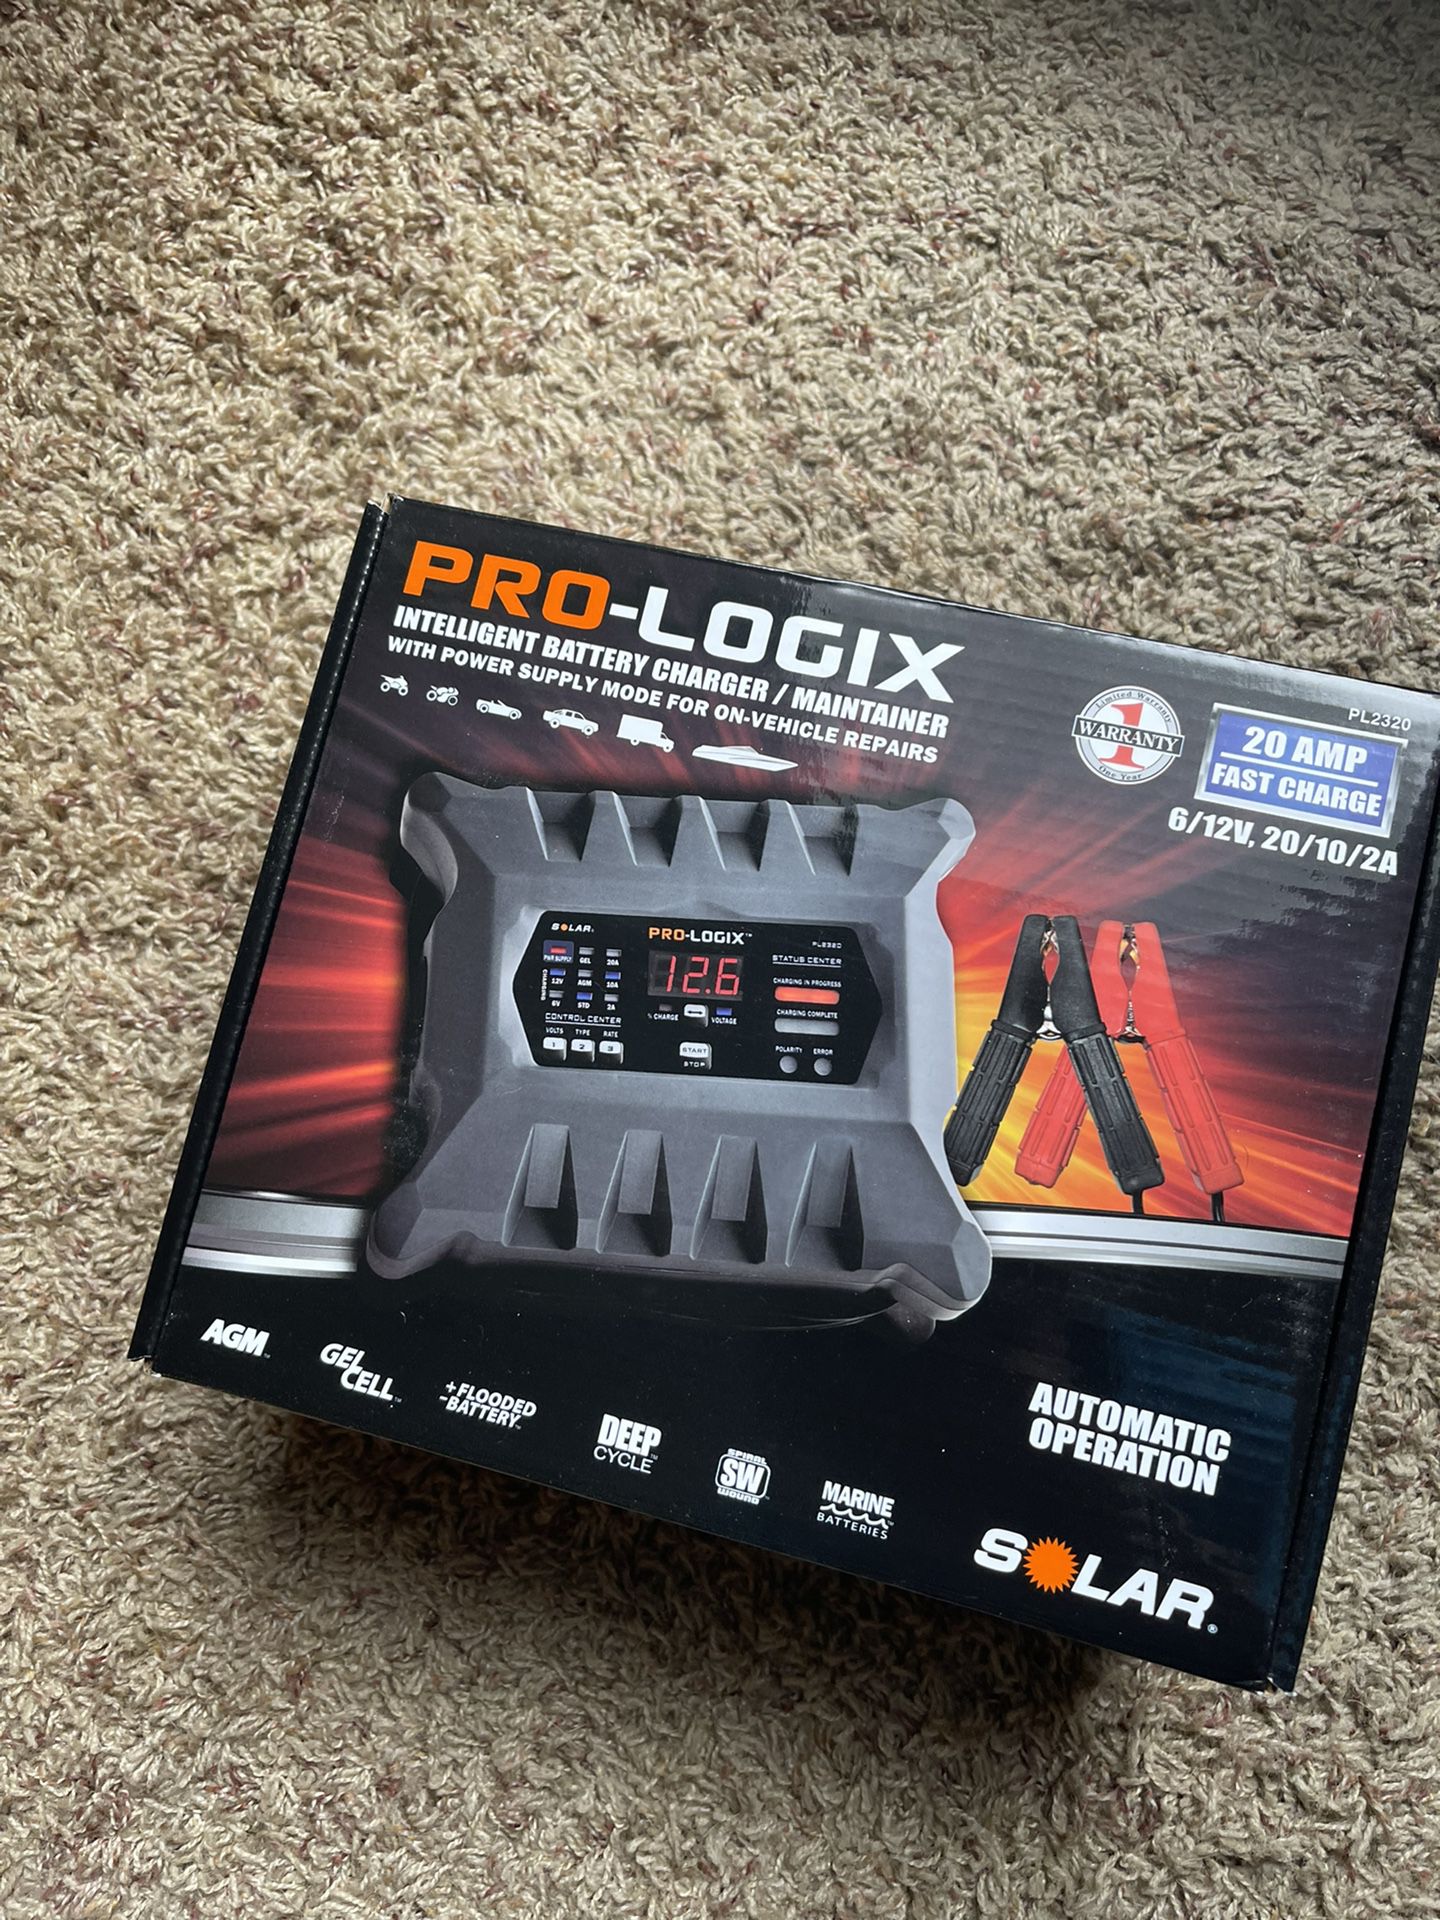 PRO-LOGIX Intelligent Battery Charger/Maintainer